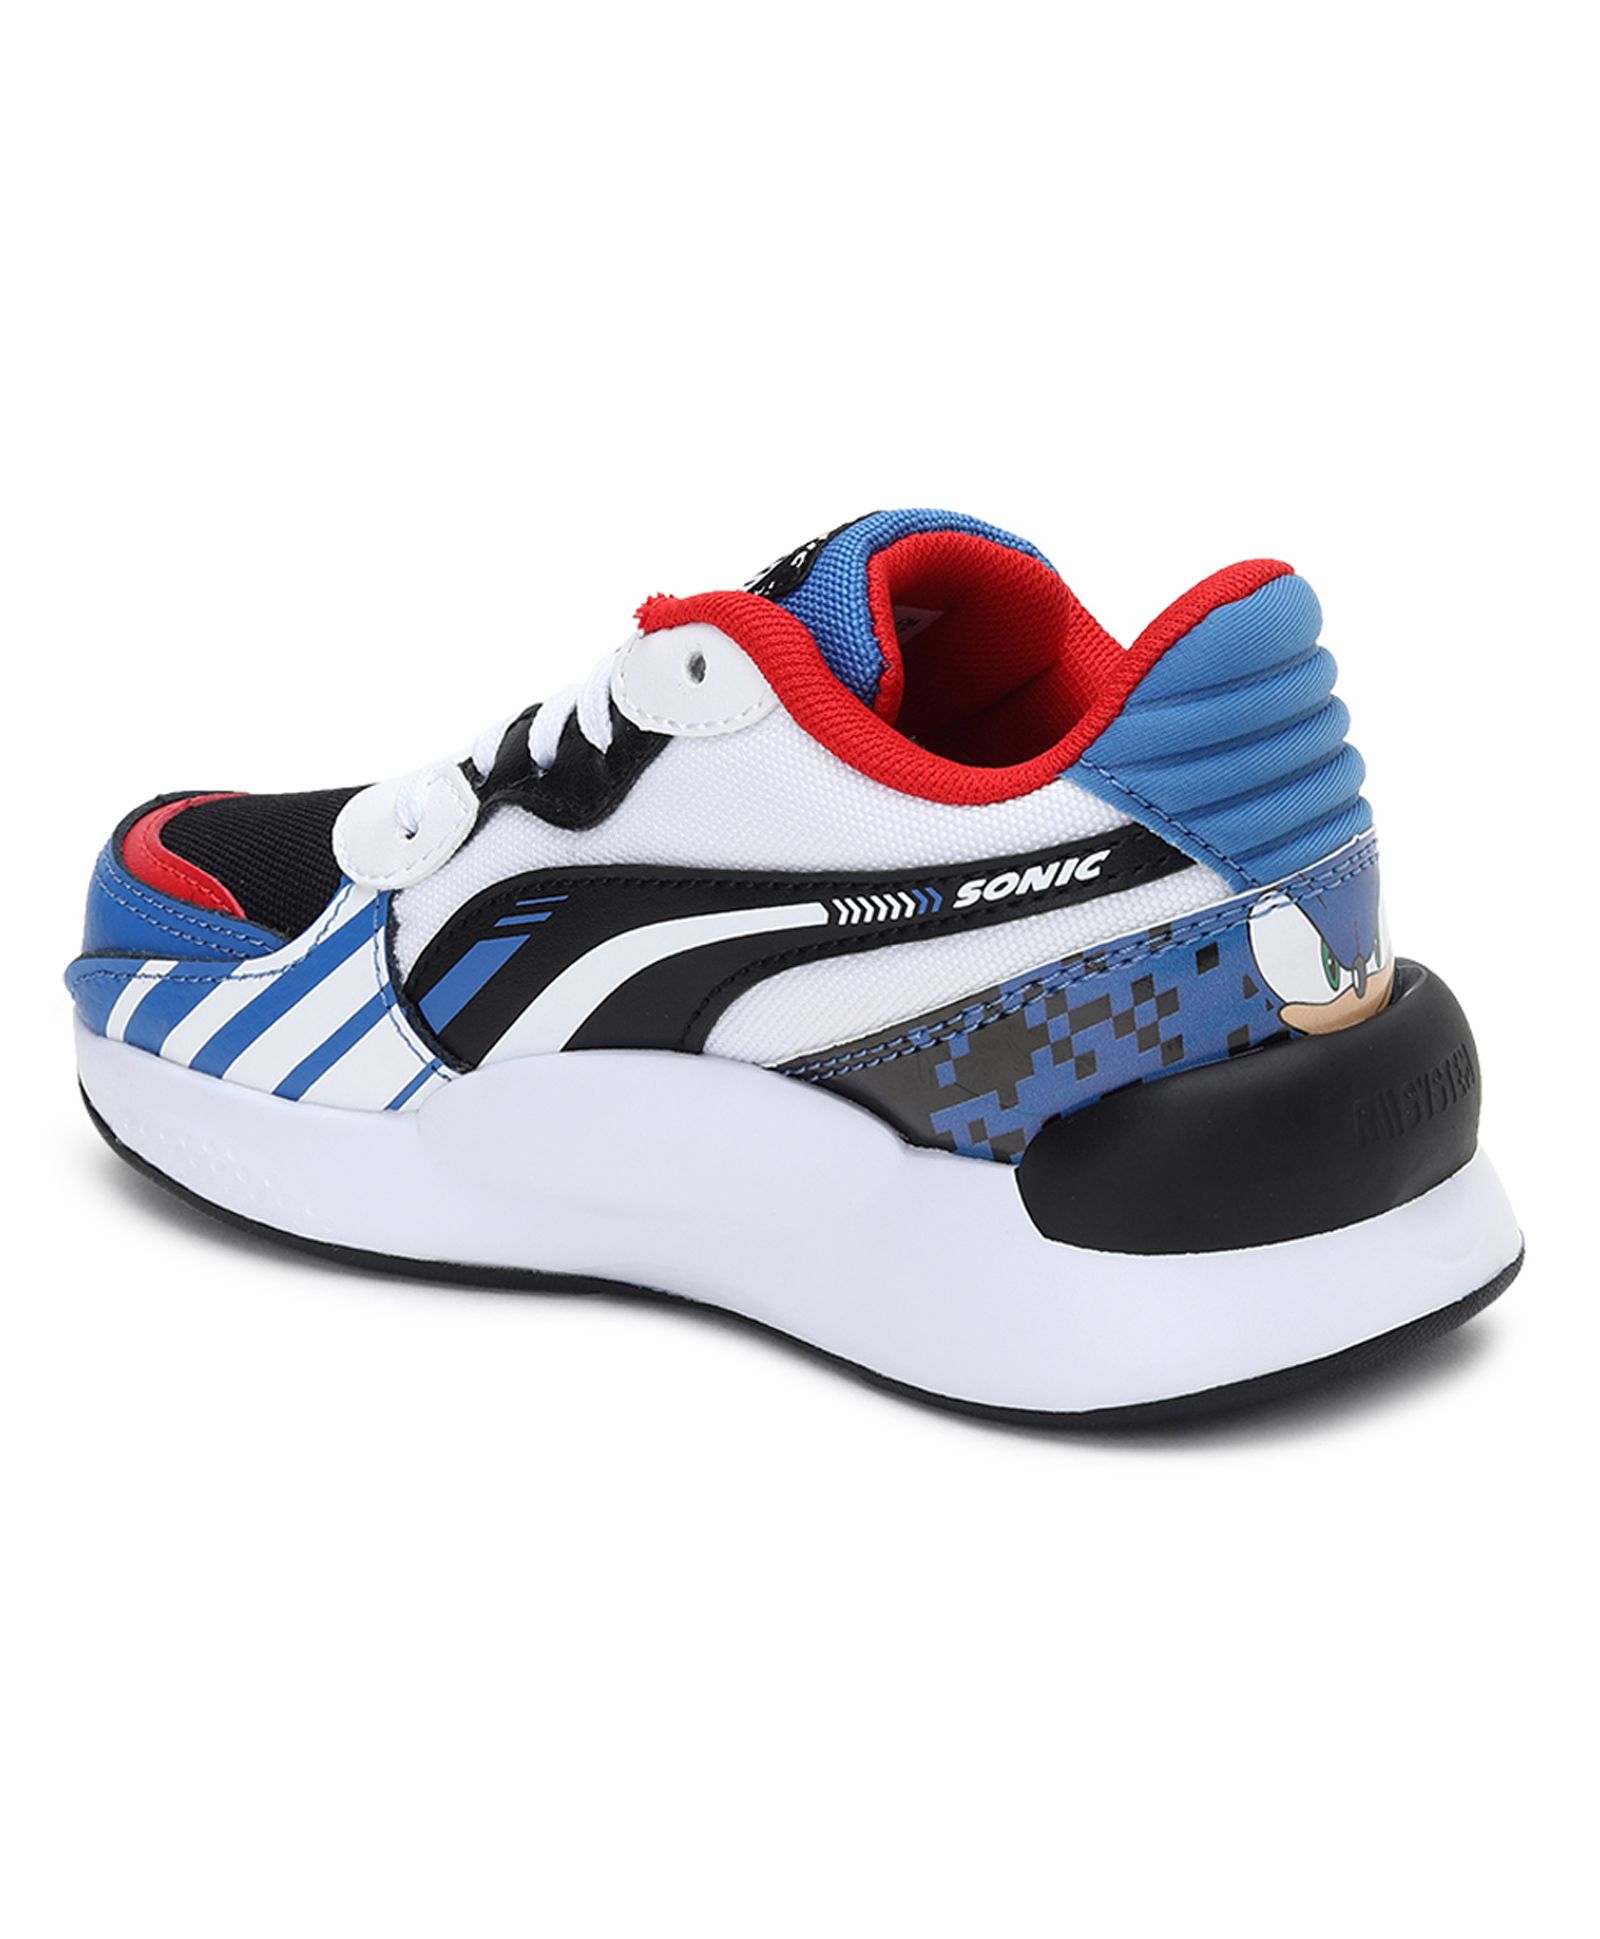 Buy Puma Sega Rs 9 8 Sonic Ps Shoes Blue White For Both 7 8 Years Online Shop At Firstcry Com